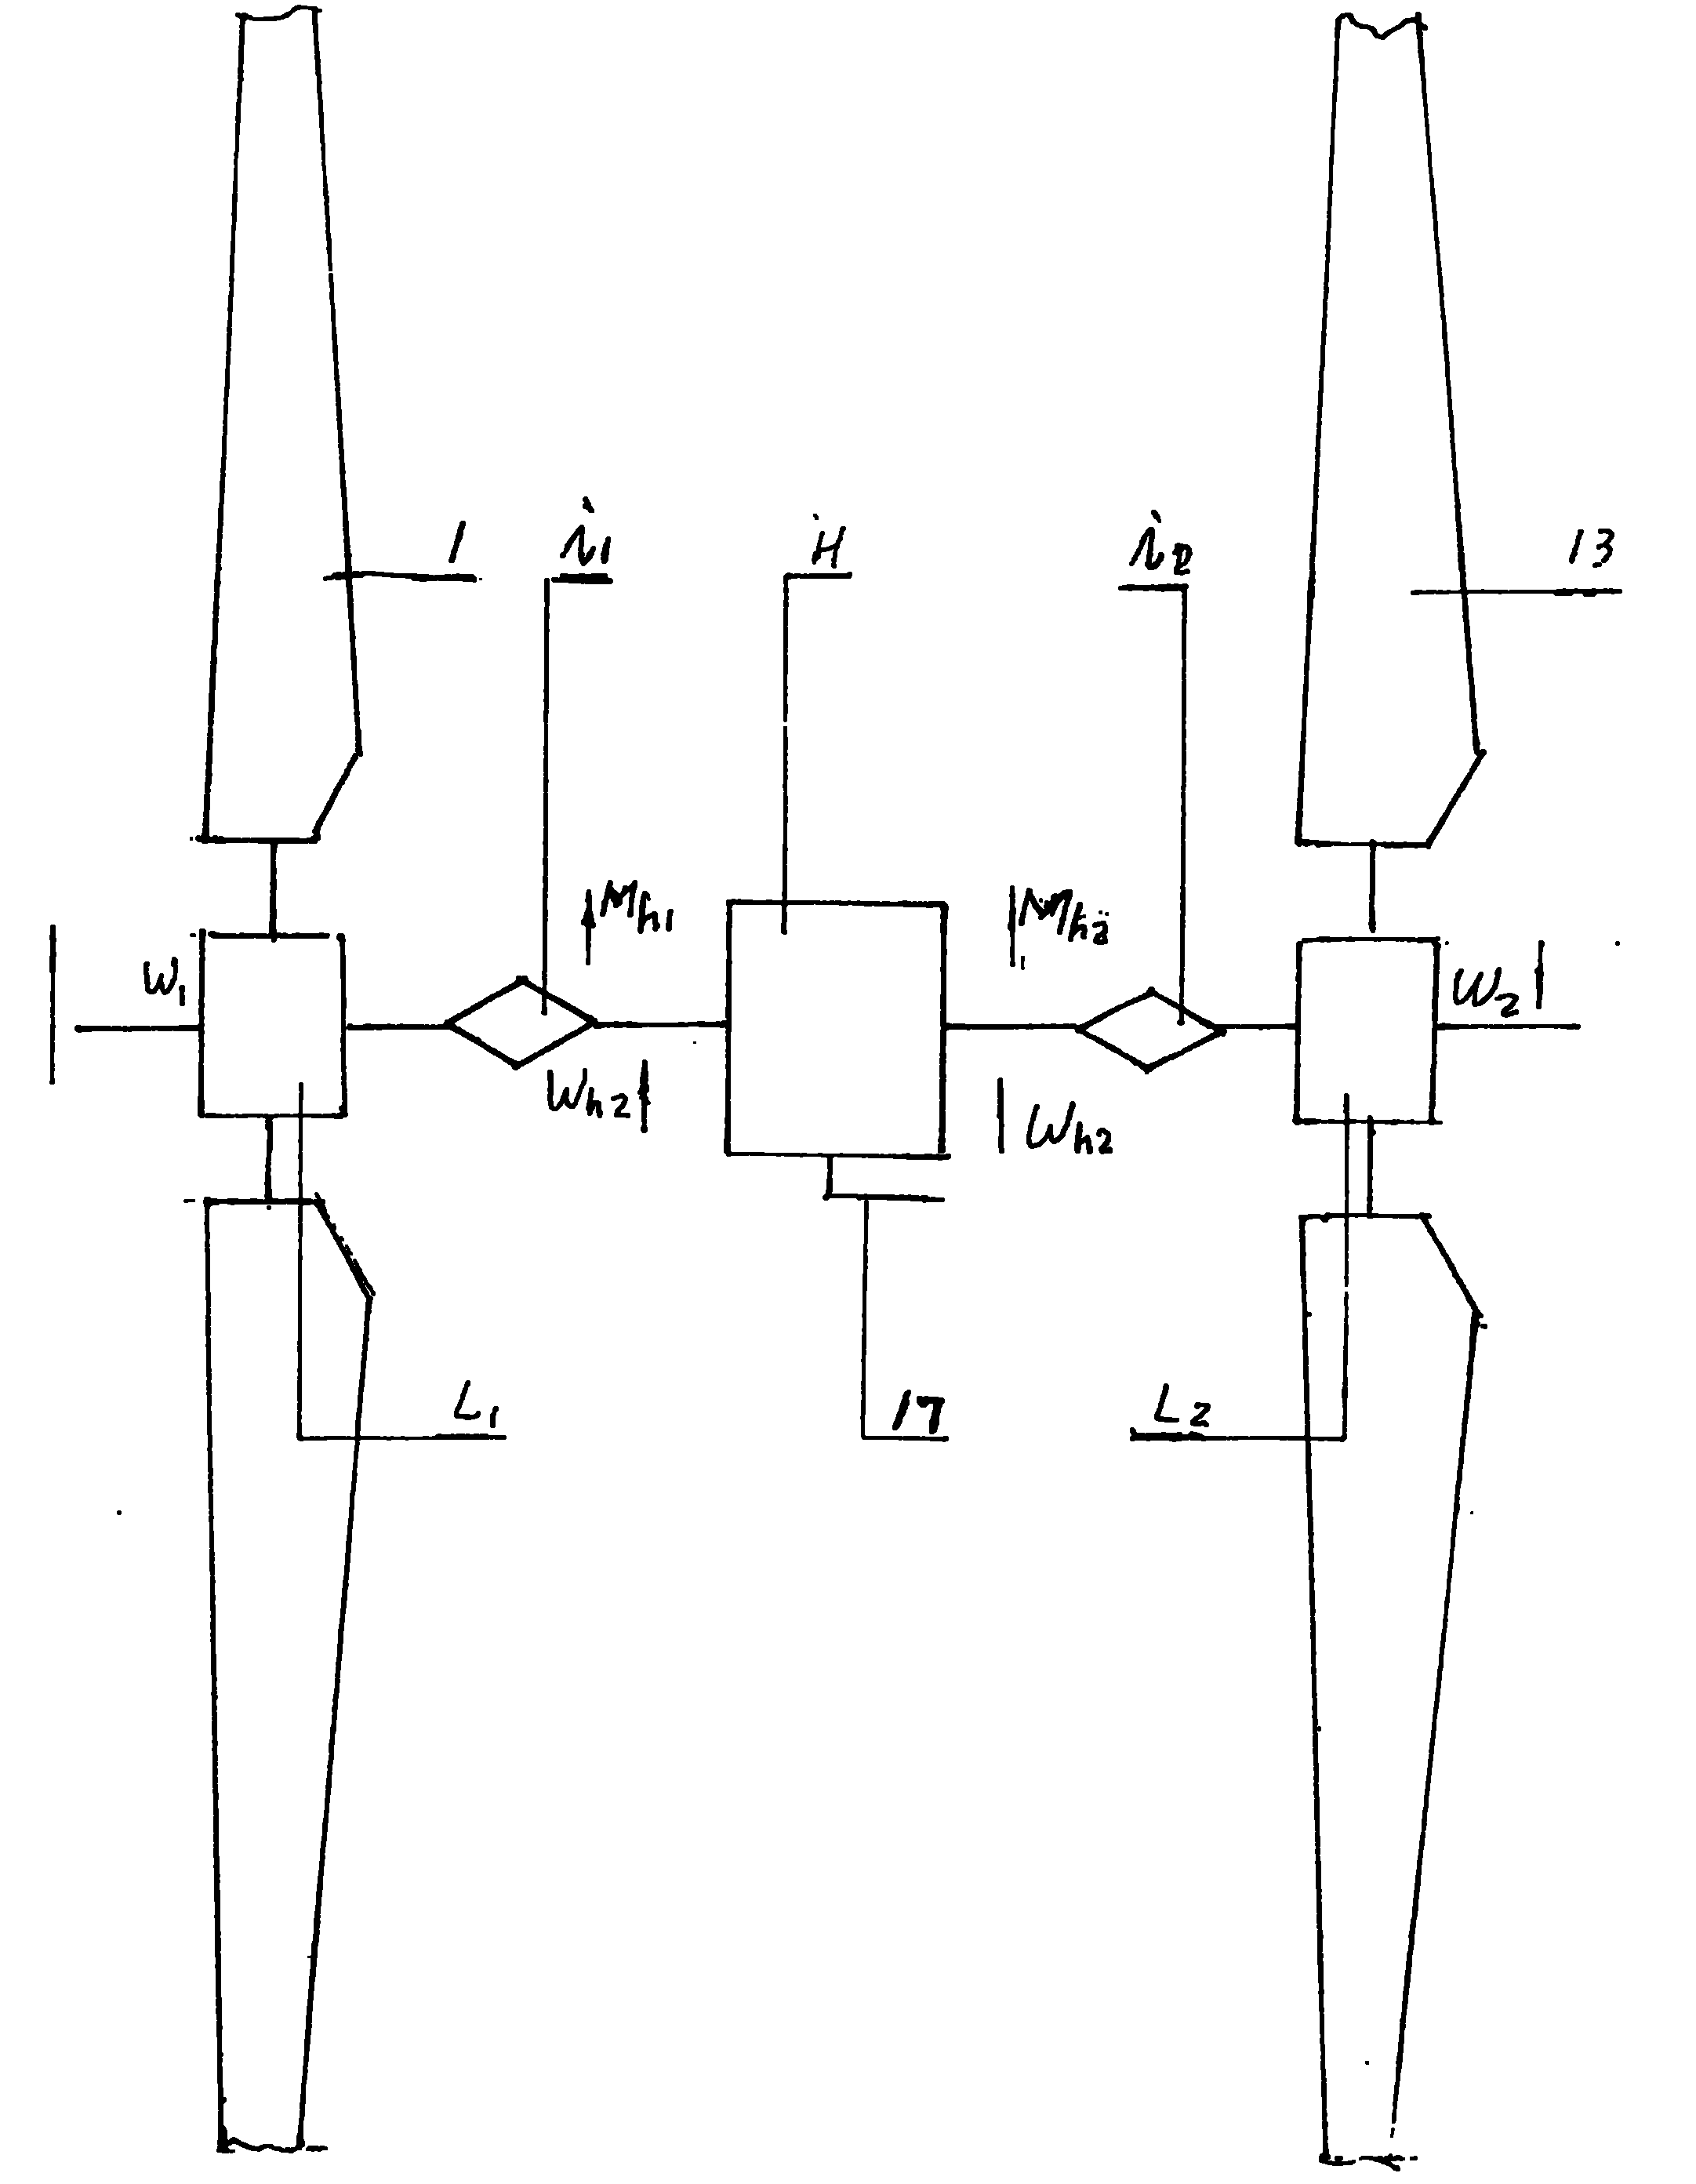 Wind driven generator with double wind wheels with power synthesis